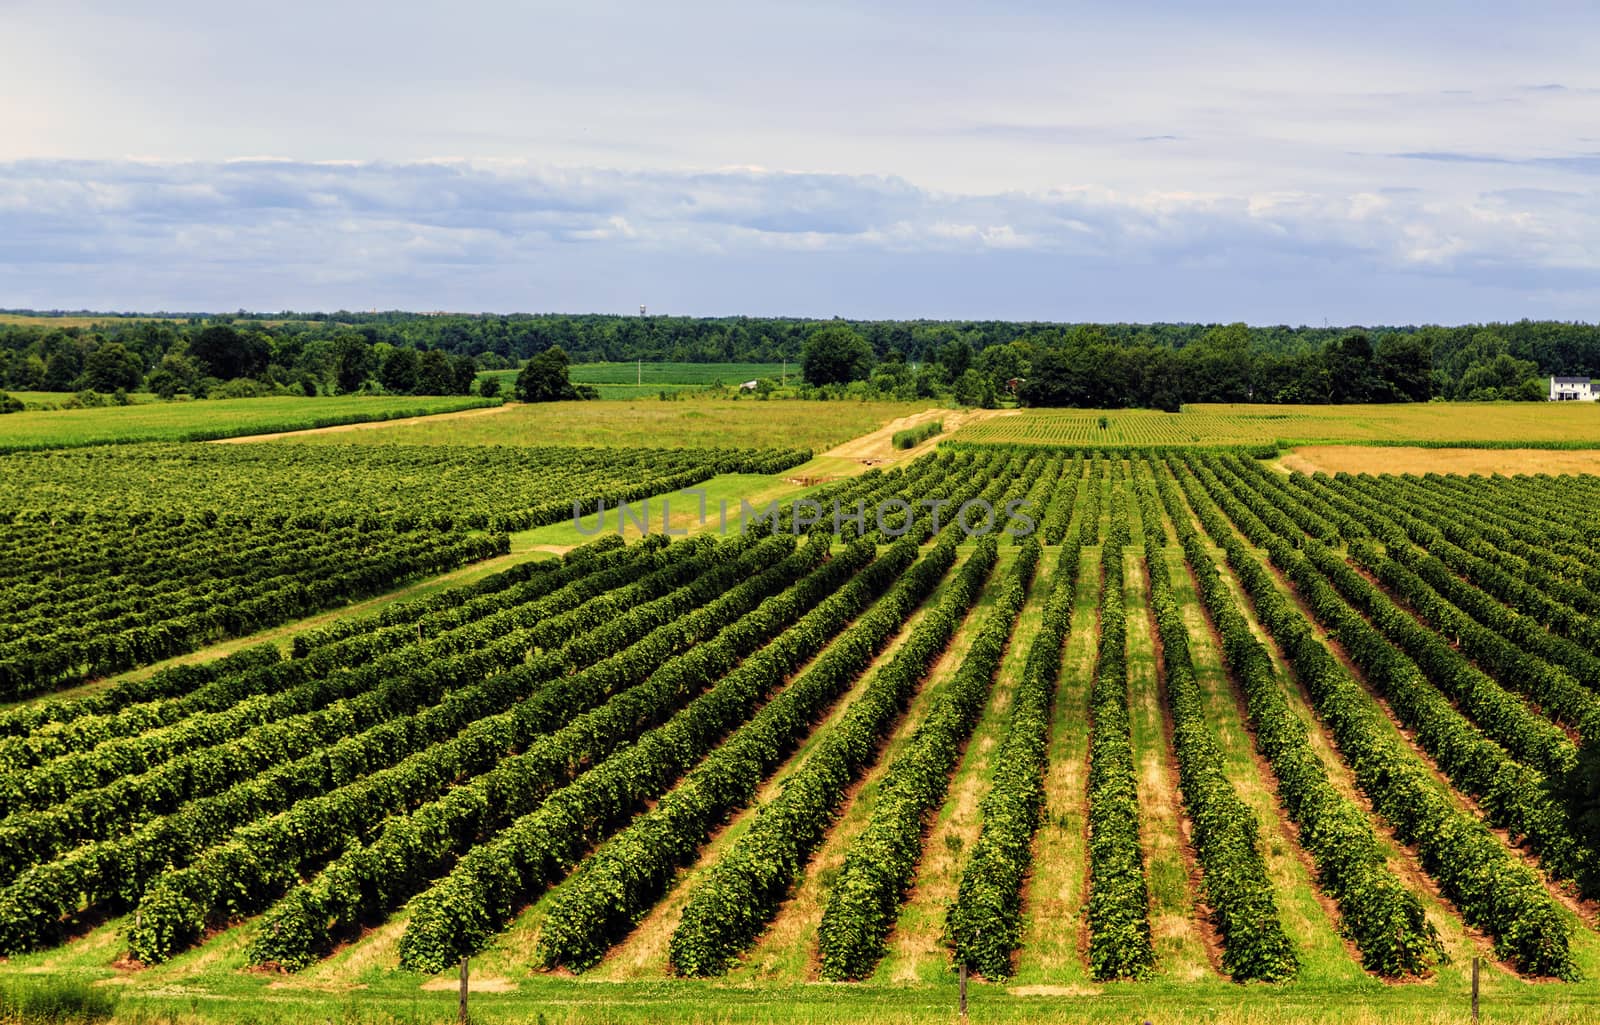 Neat and symmetrical rows of grape vines expand over the country side. 